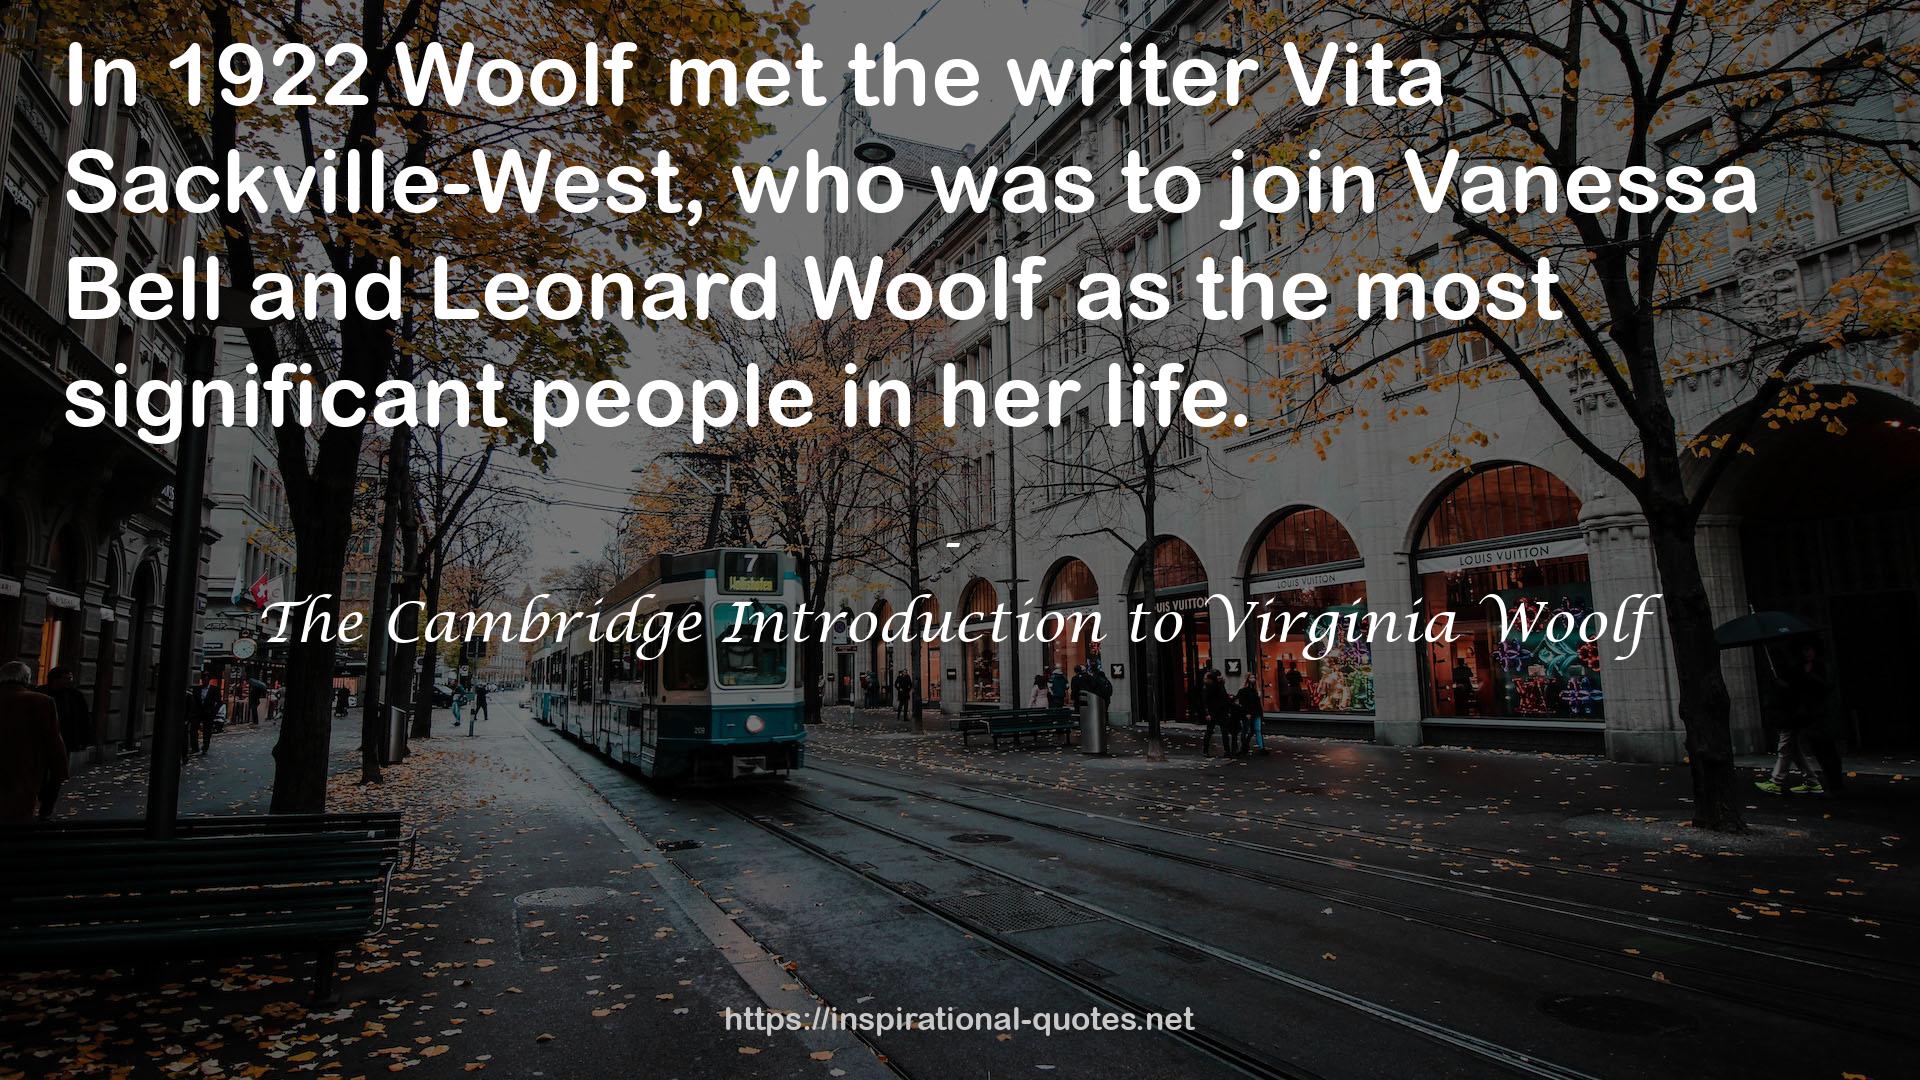 The Cambridge Introduction to Virginia Woolf QUOTES